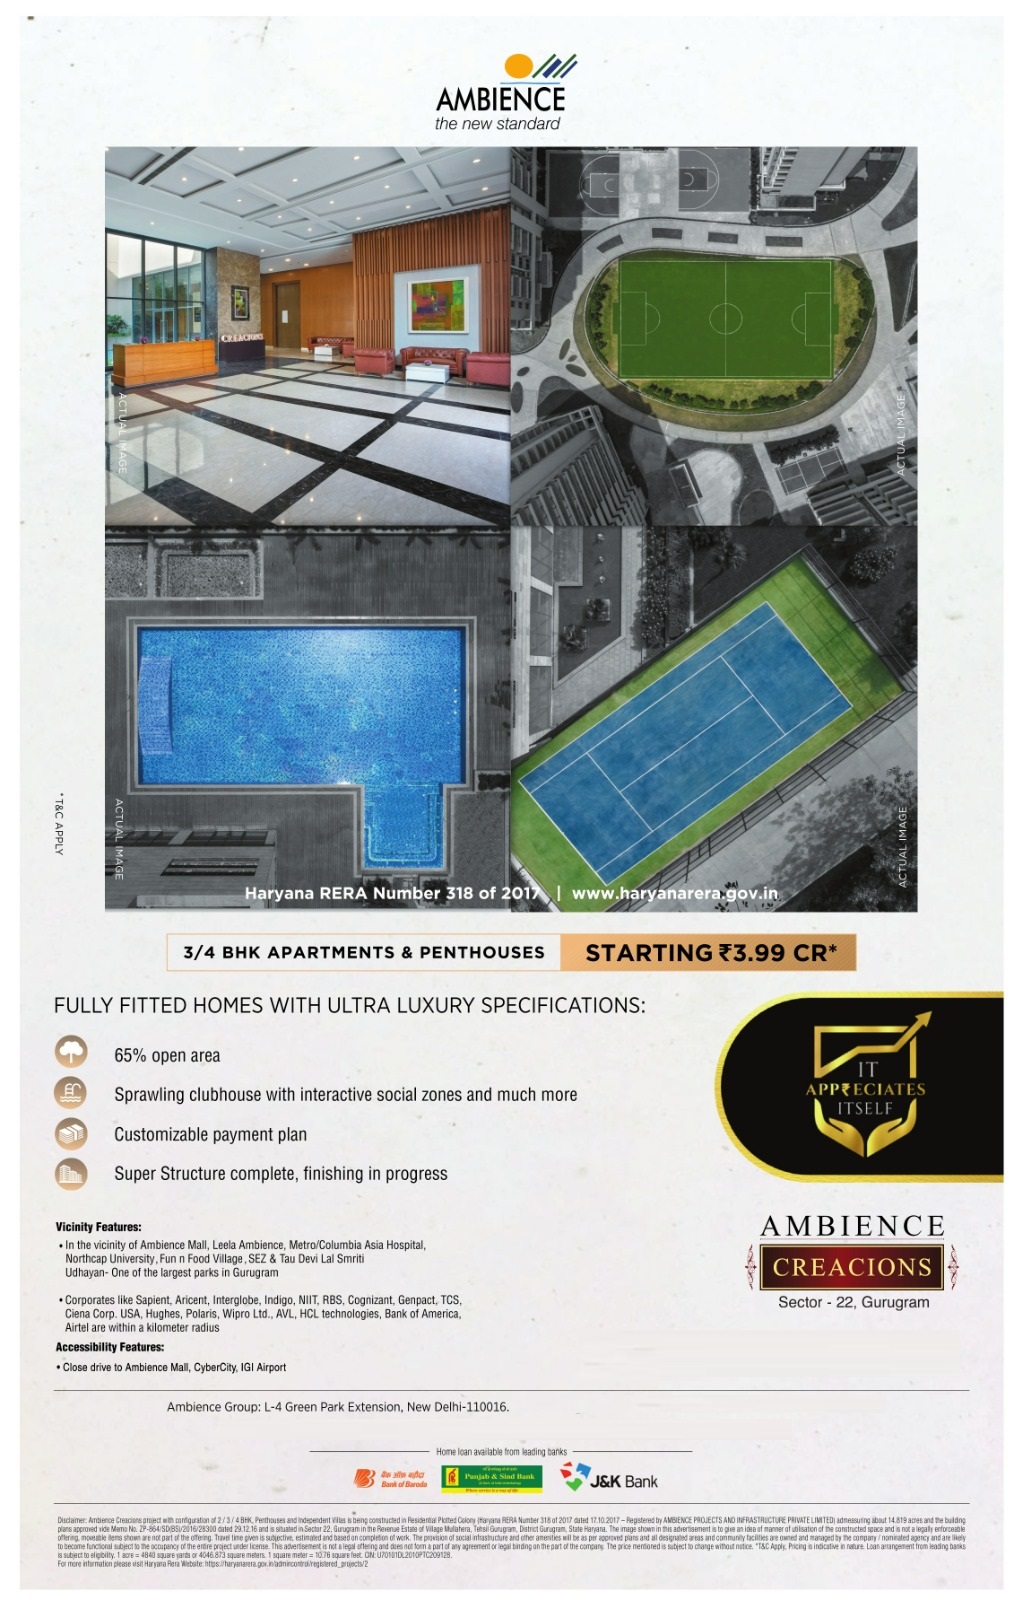 Fully fitted home with ultra luxury specifications at Ambience Creacions, Gurgaon Update